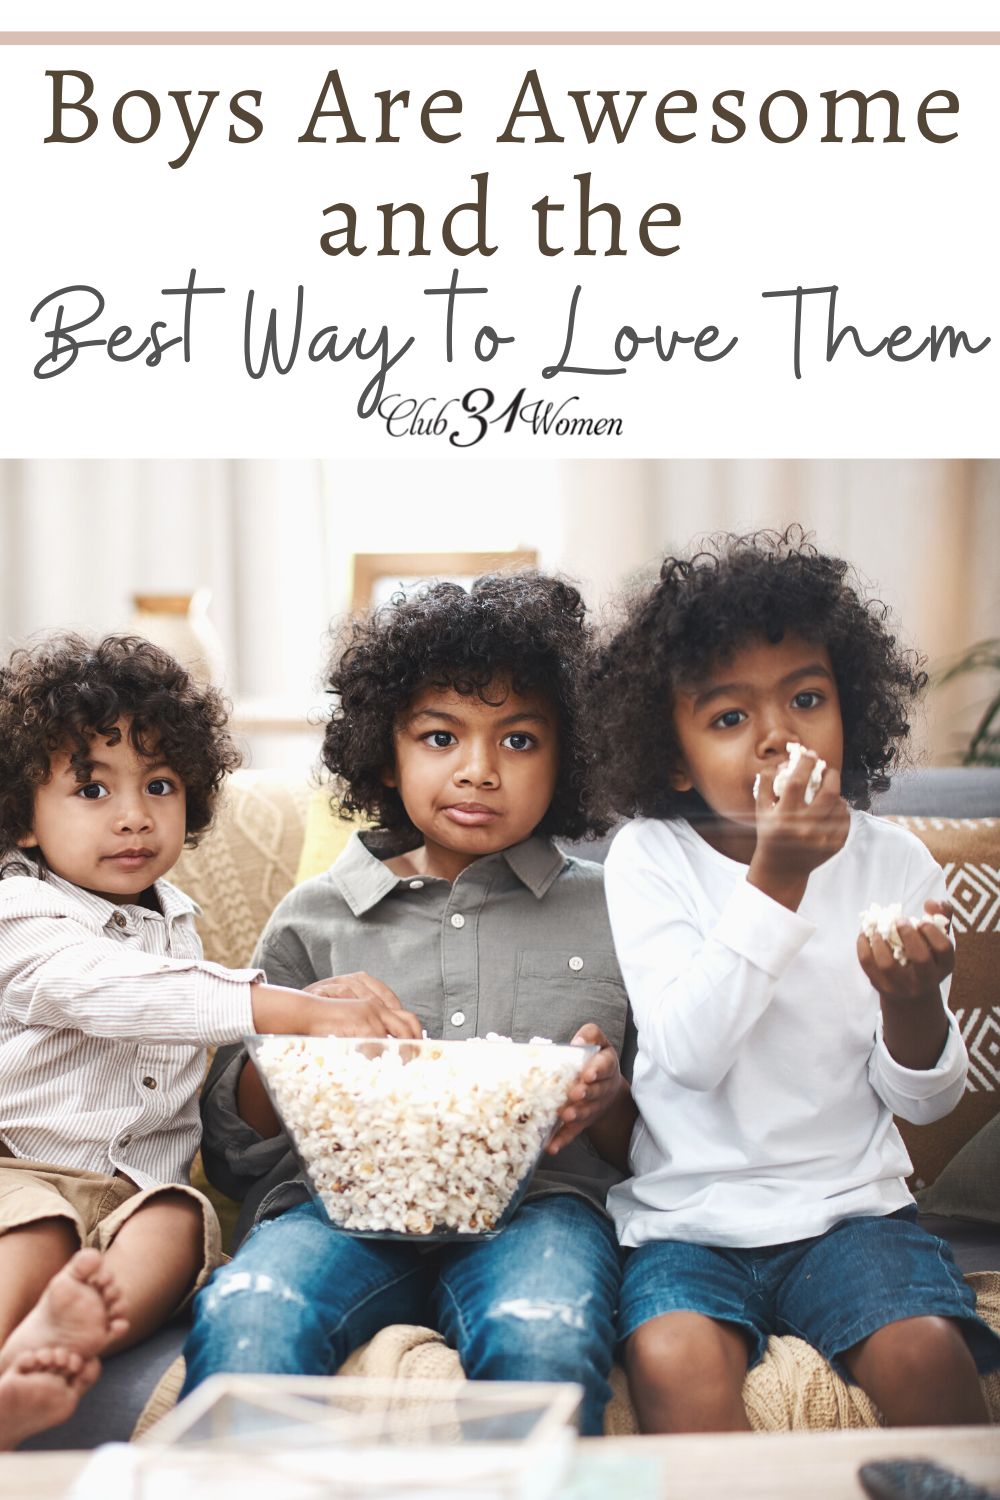 Boys are awesome! There's so much to appreciate in our sons and something to know about loving them. Some really GREAT advice here - from a mom who knows! via @Club31Women